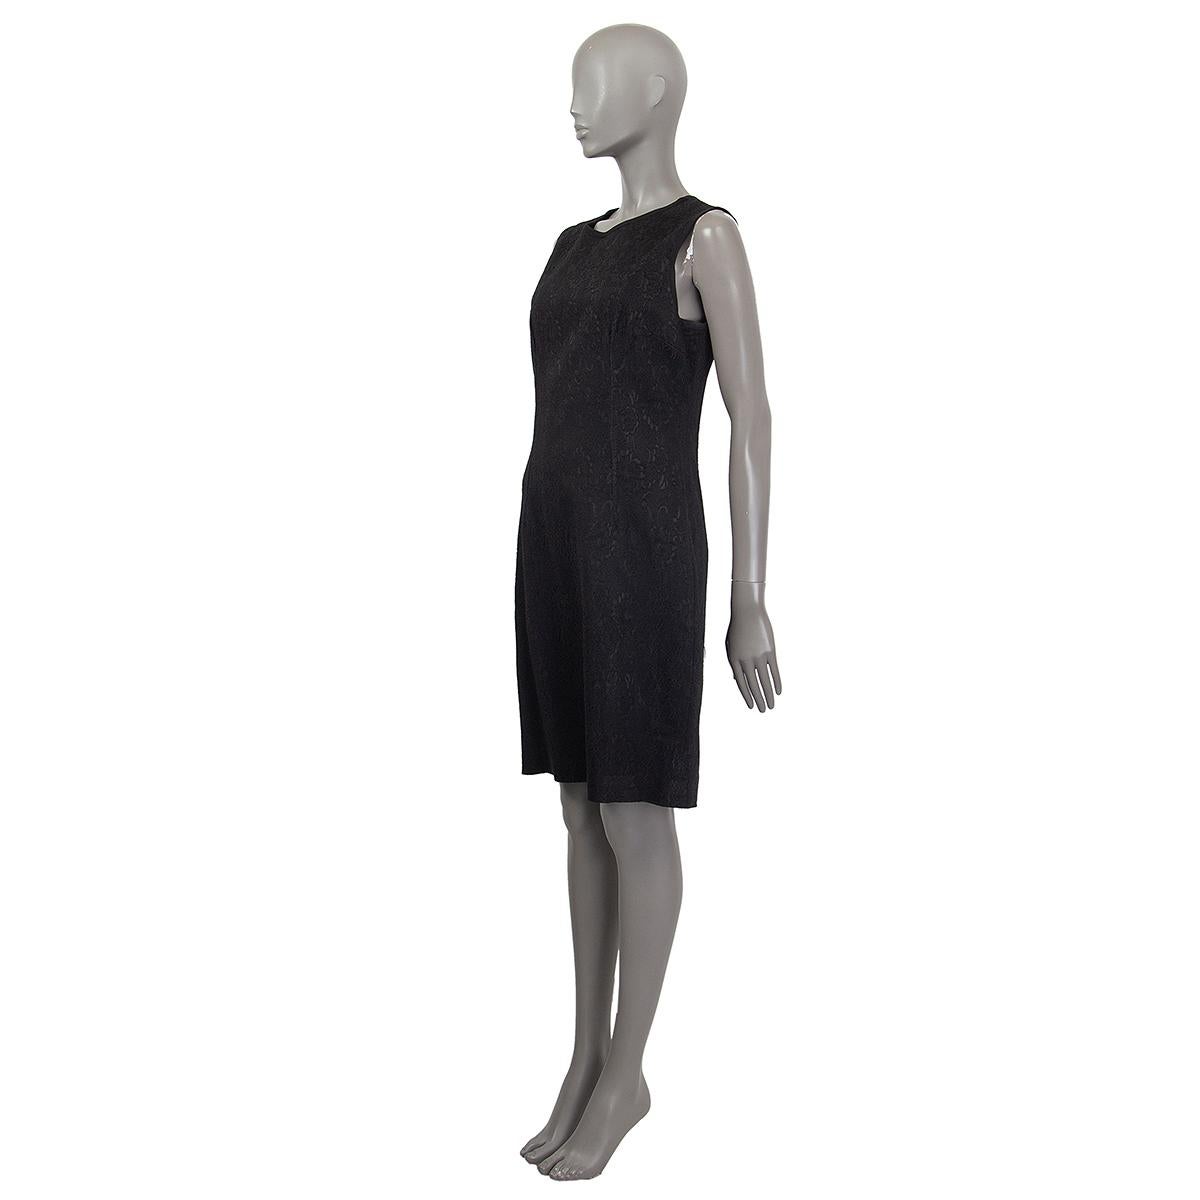 100% authentic Dolce & Gabbana sleeveless jacquard dress in black acetate (78%), nylon (18%) and elastane (3%). Opens with a zipper in the back. Lined in viscose (with 5% elastane). Has been worn and is in excellent condition.

Measurements
Tag